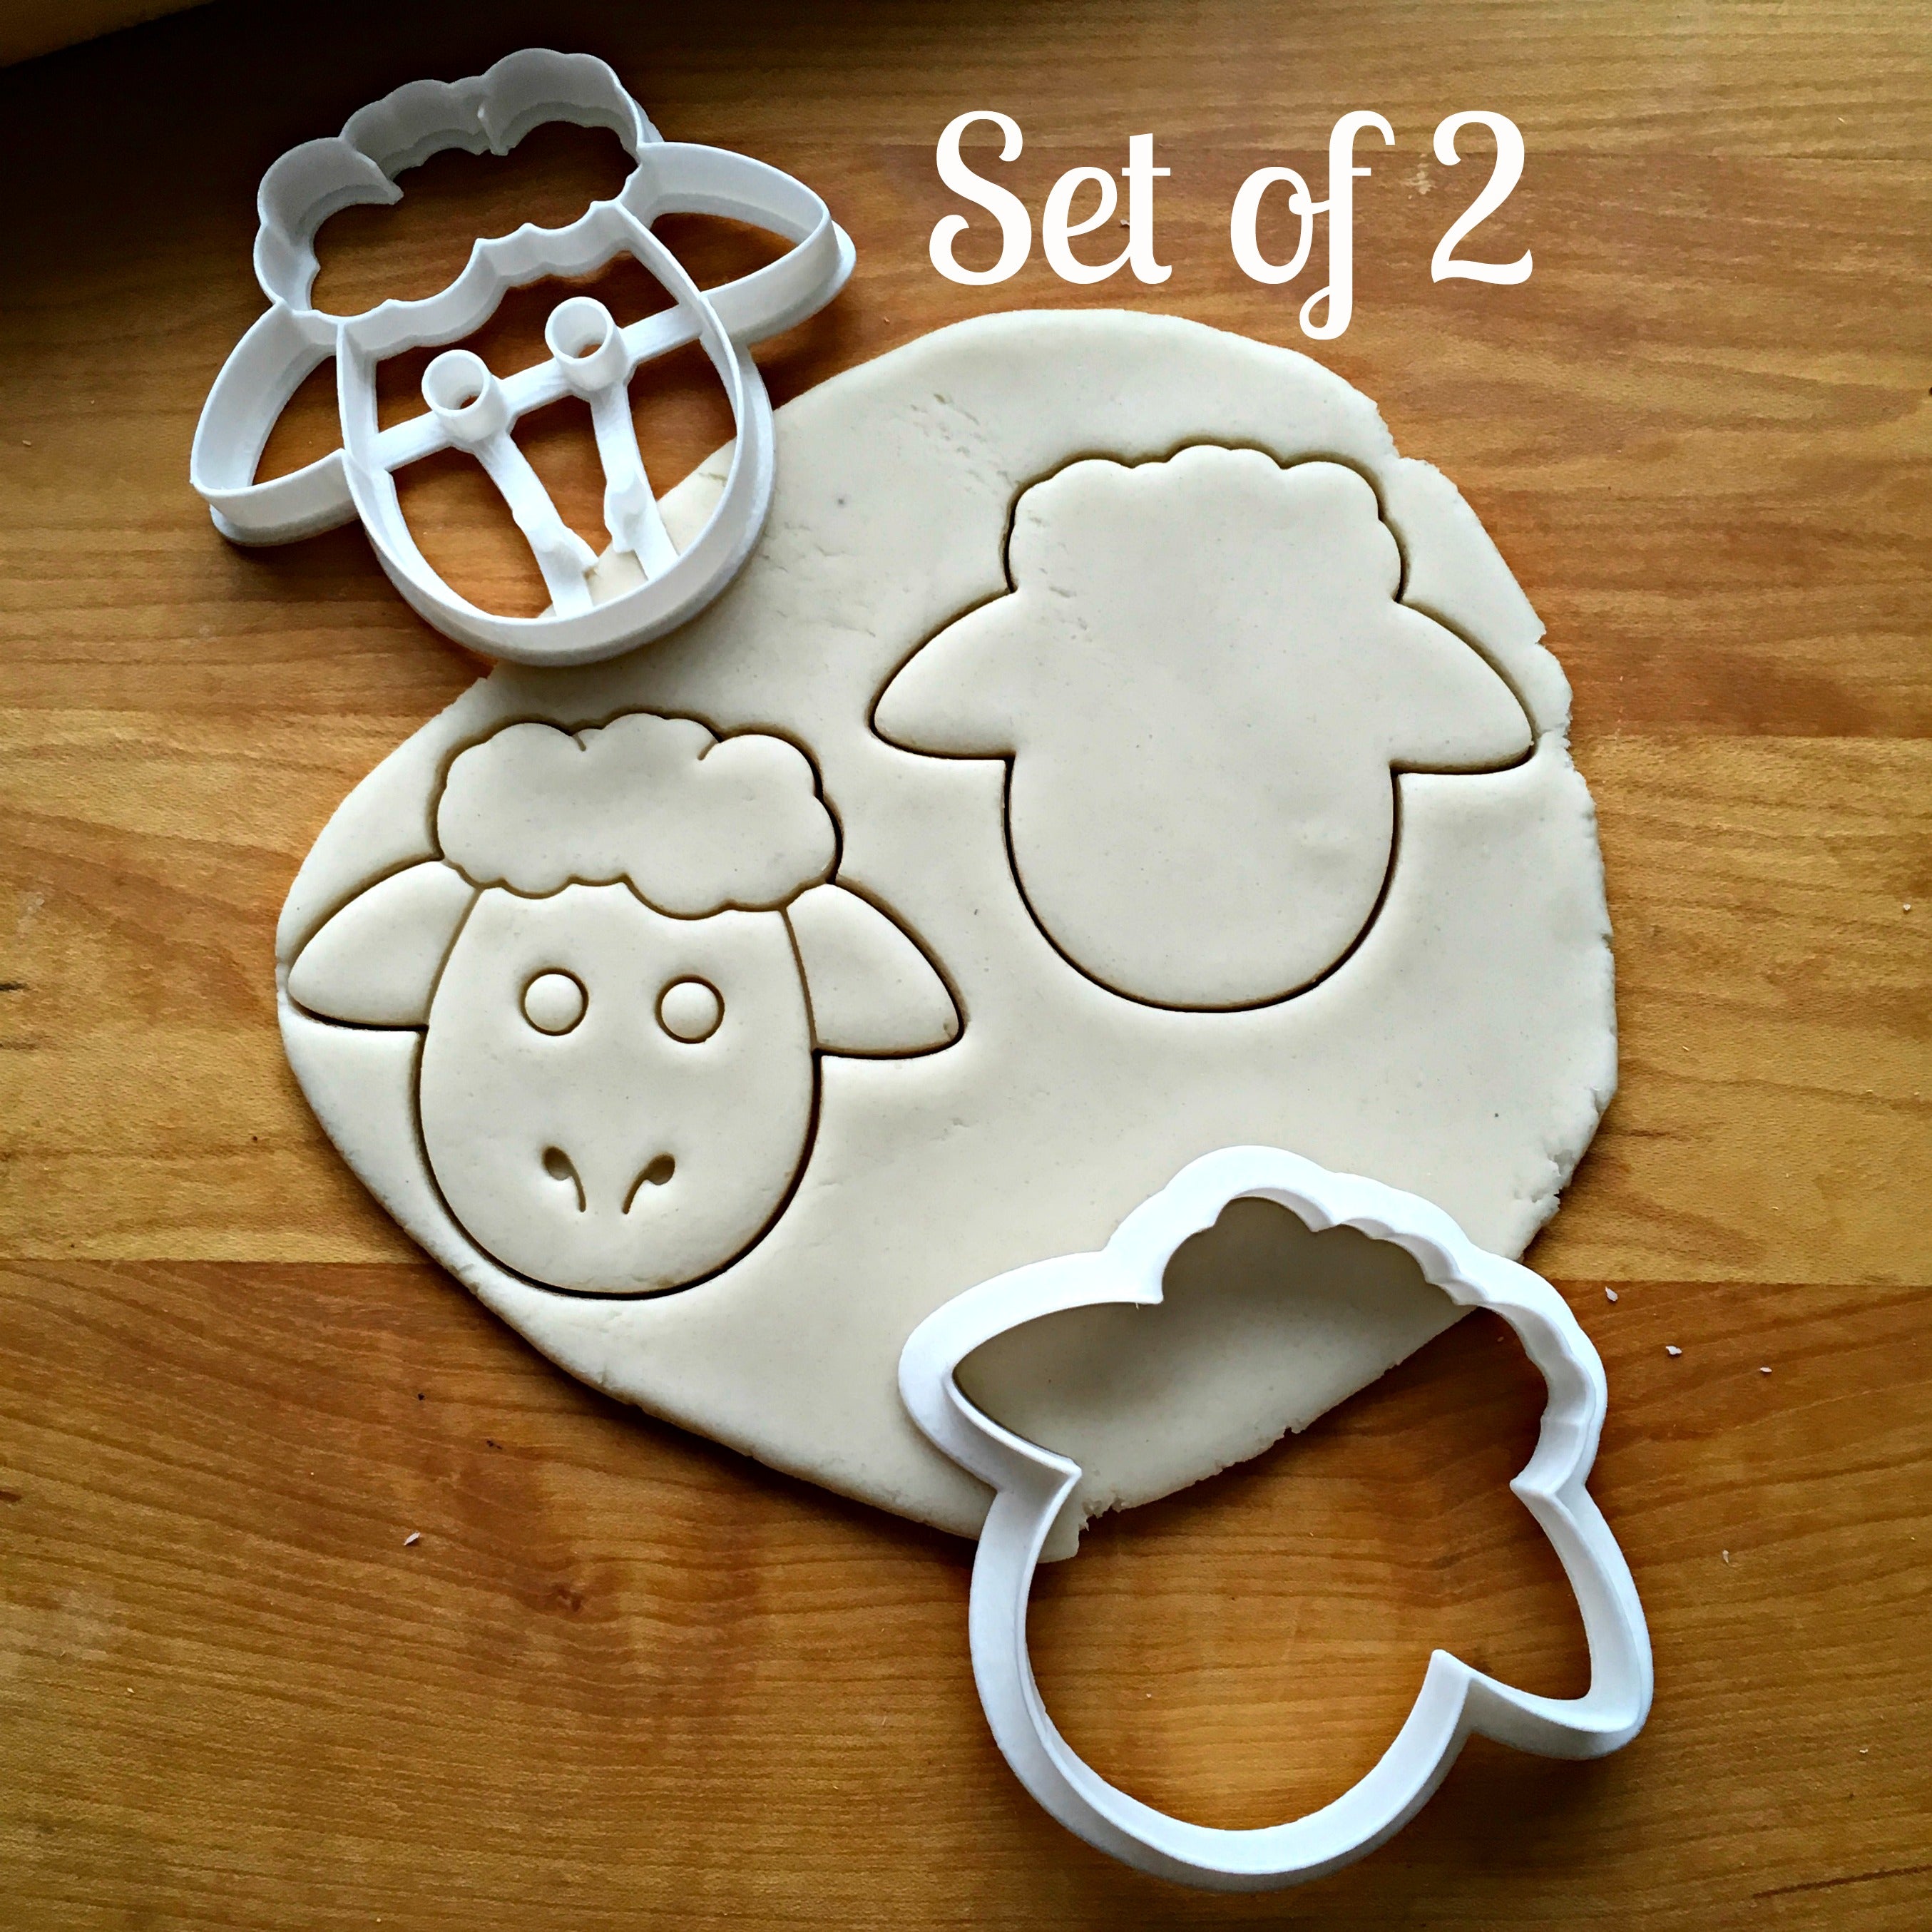 Set of 2 Sheep Face Cookie Cutters/Dishwasher Safe